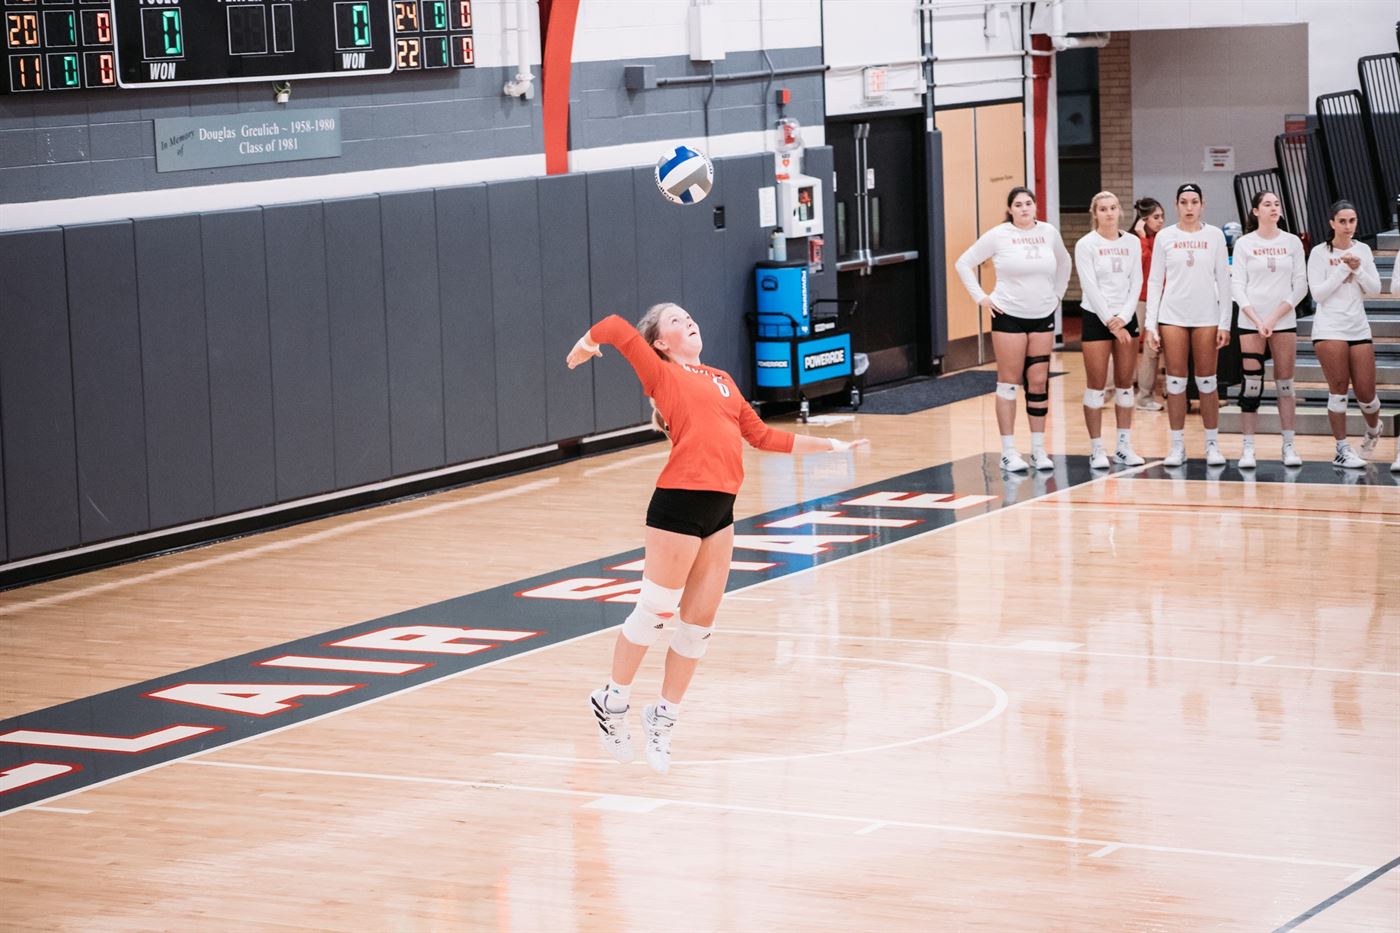 Emma Hatcher, leader in digs and service assists on the team, gets ready to serve the ball. Dan Dreisbach | The Montclarion